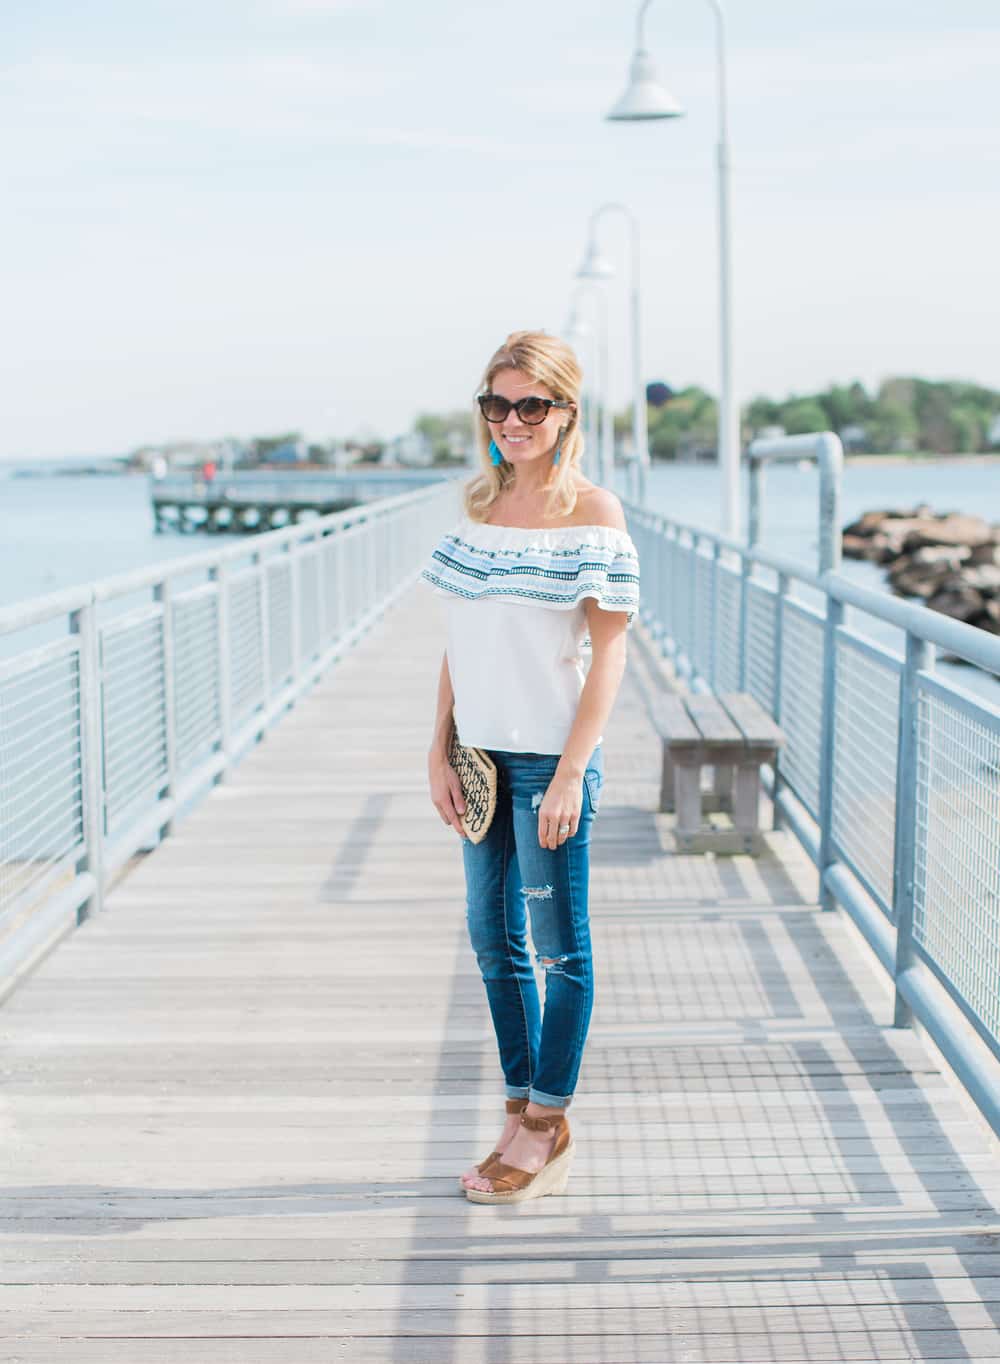 OUTFIT POST : OFF THE SHOULDER TOP